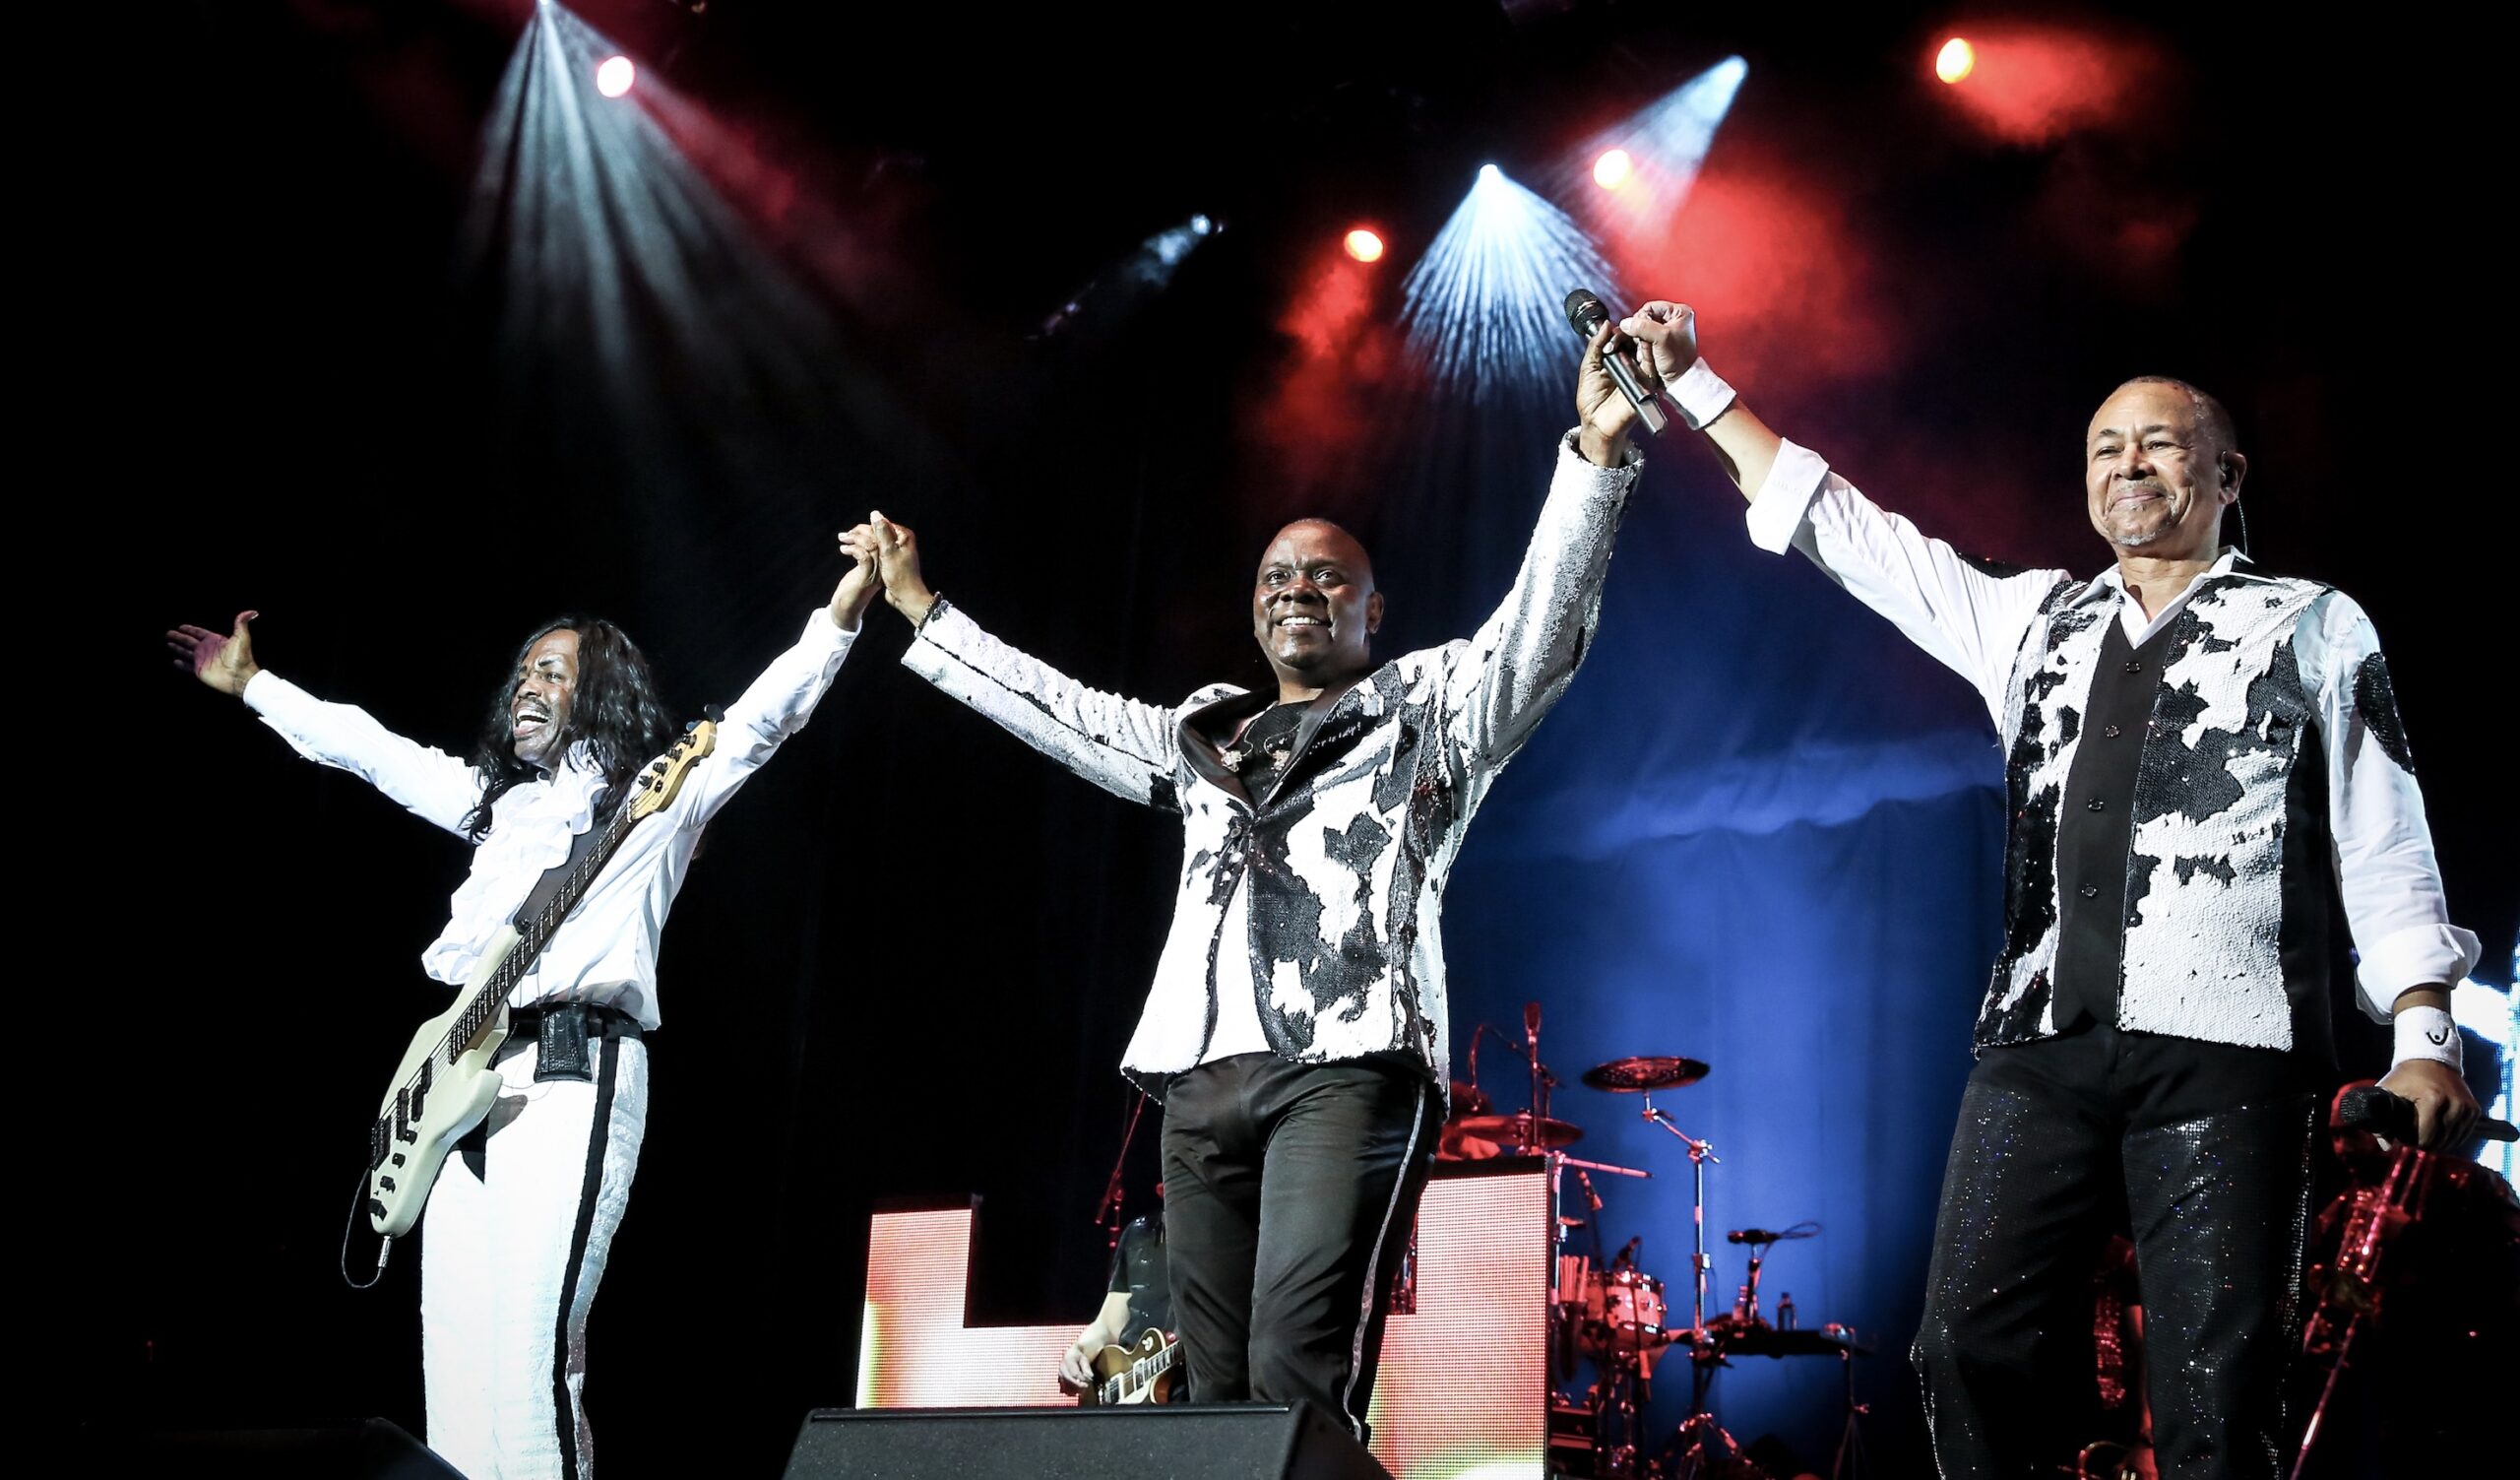 Earth Wind & Fire, ce groupe indémodable des années 80' - screen shot 2017 04 04 at 7 46 25 pm scaled